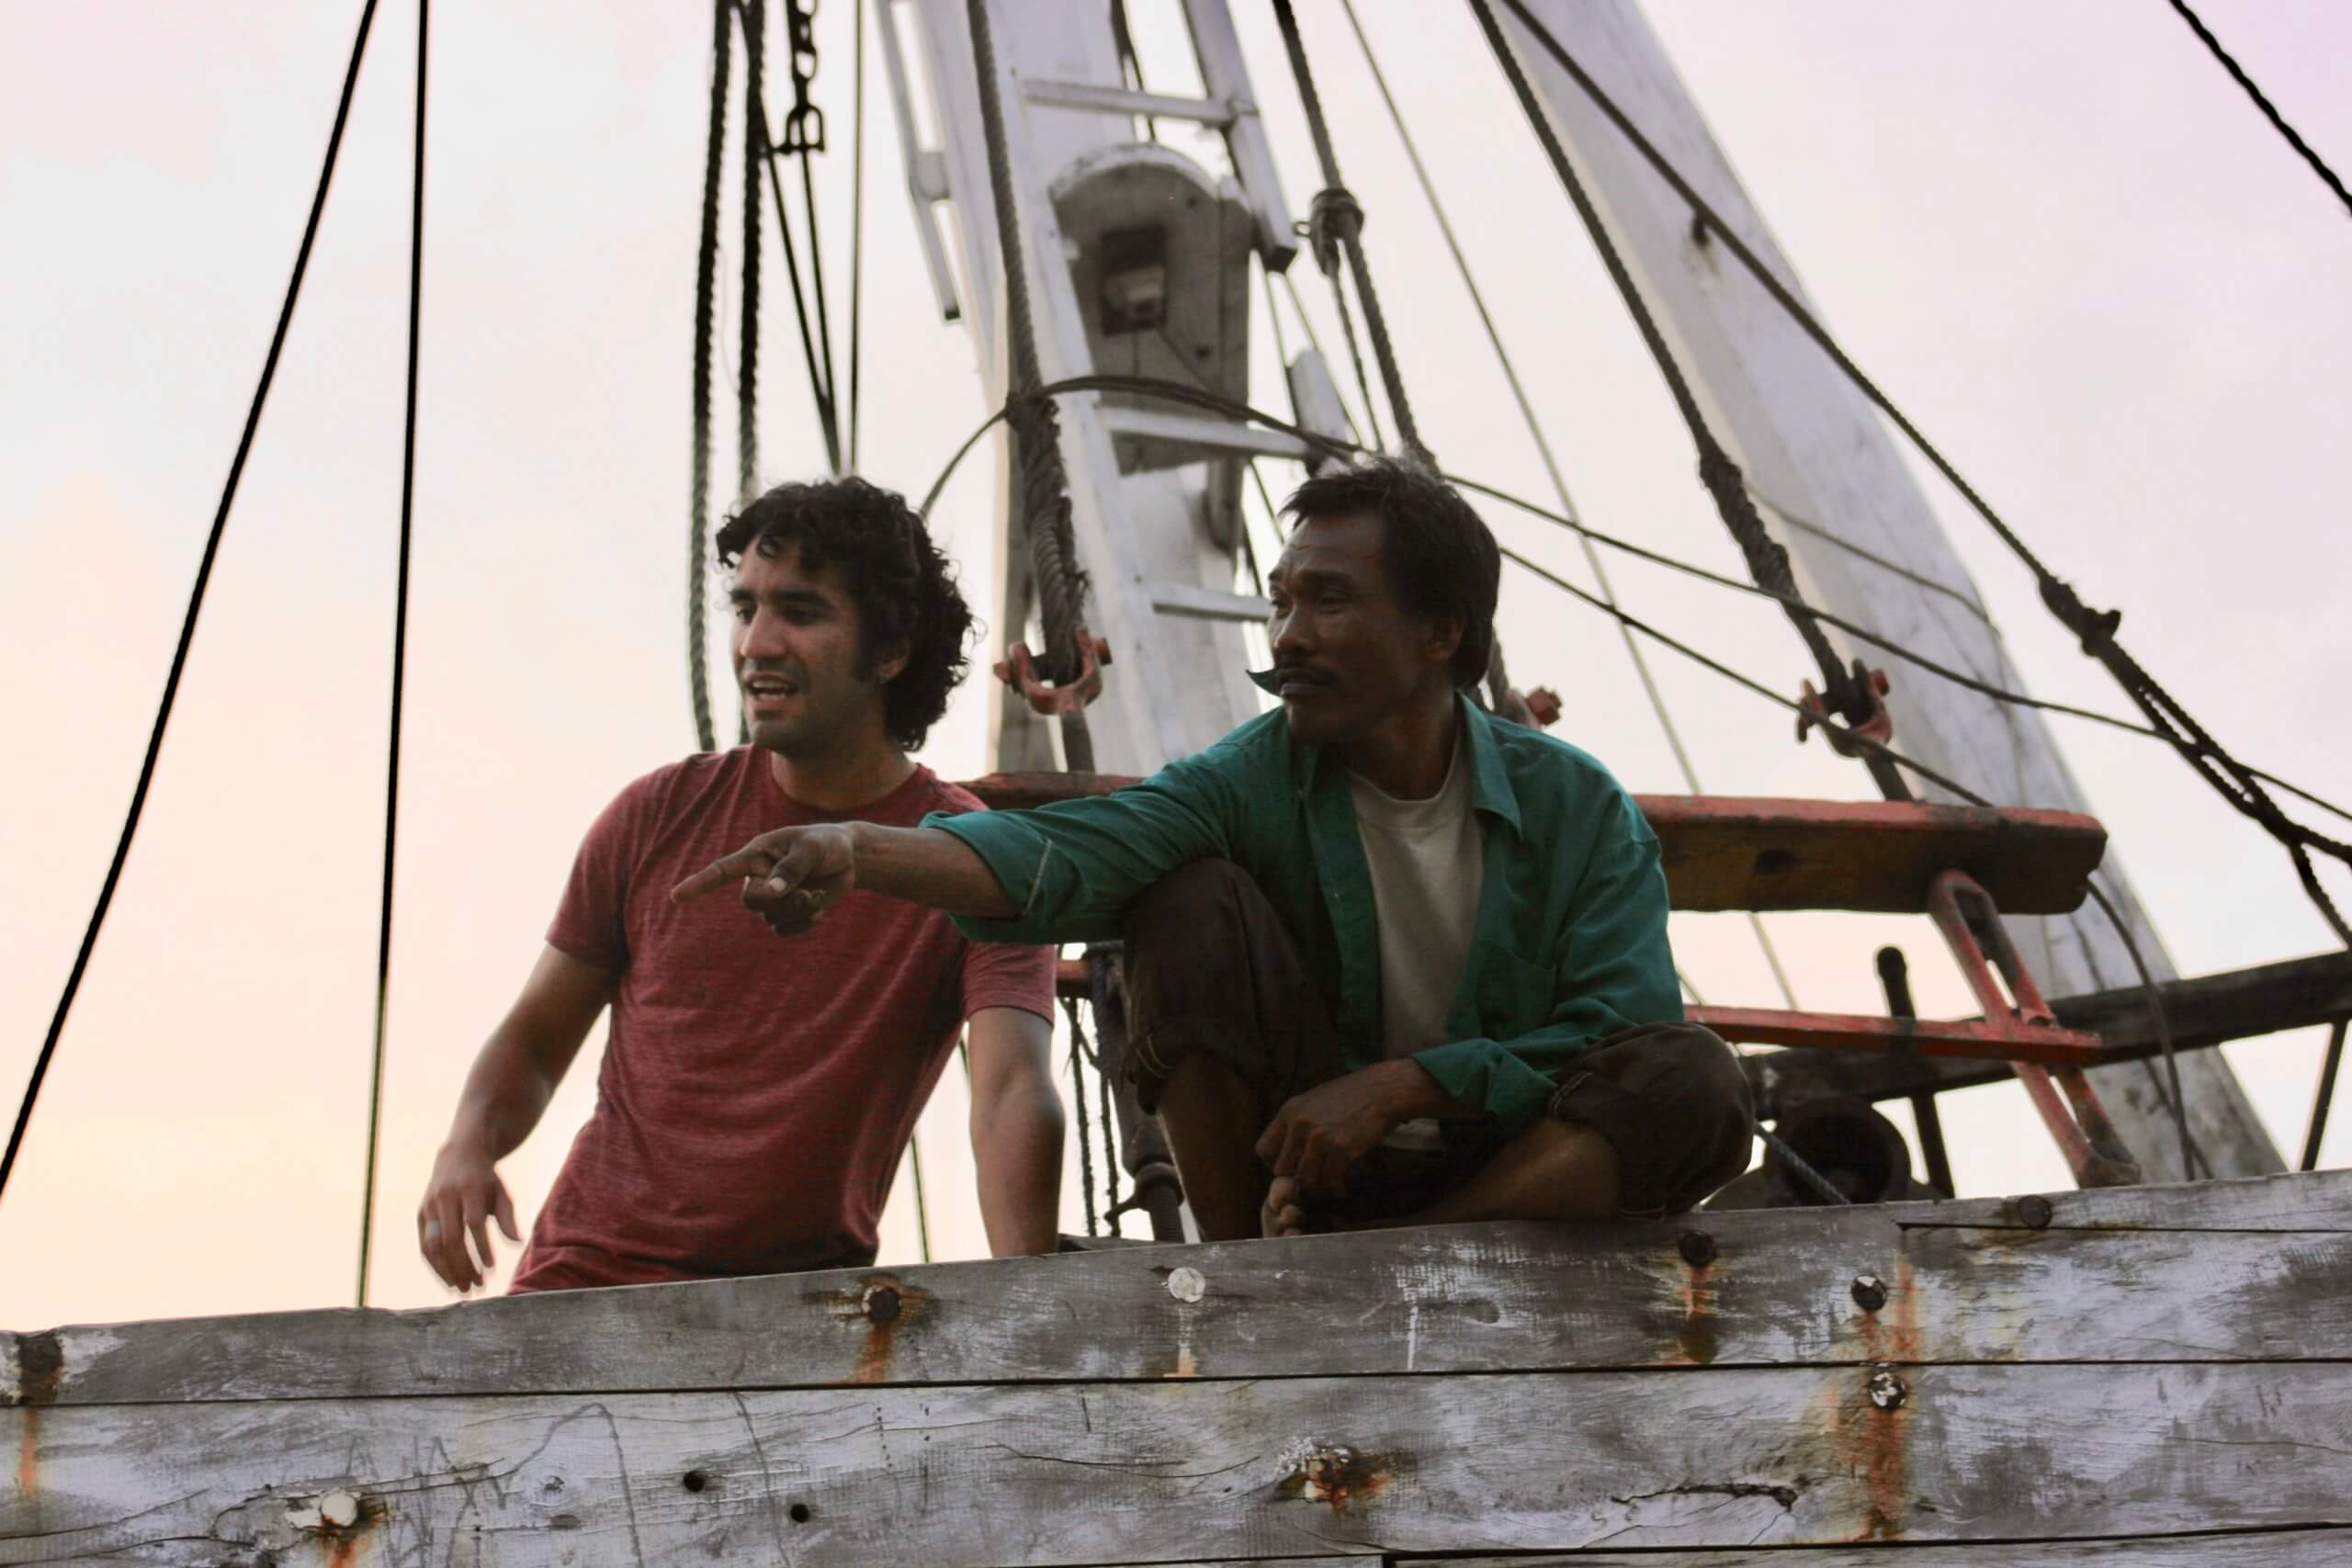 Juliano (left) talking with a fisher (right) during a trip to Indonesia on a sailboat